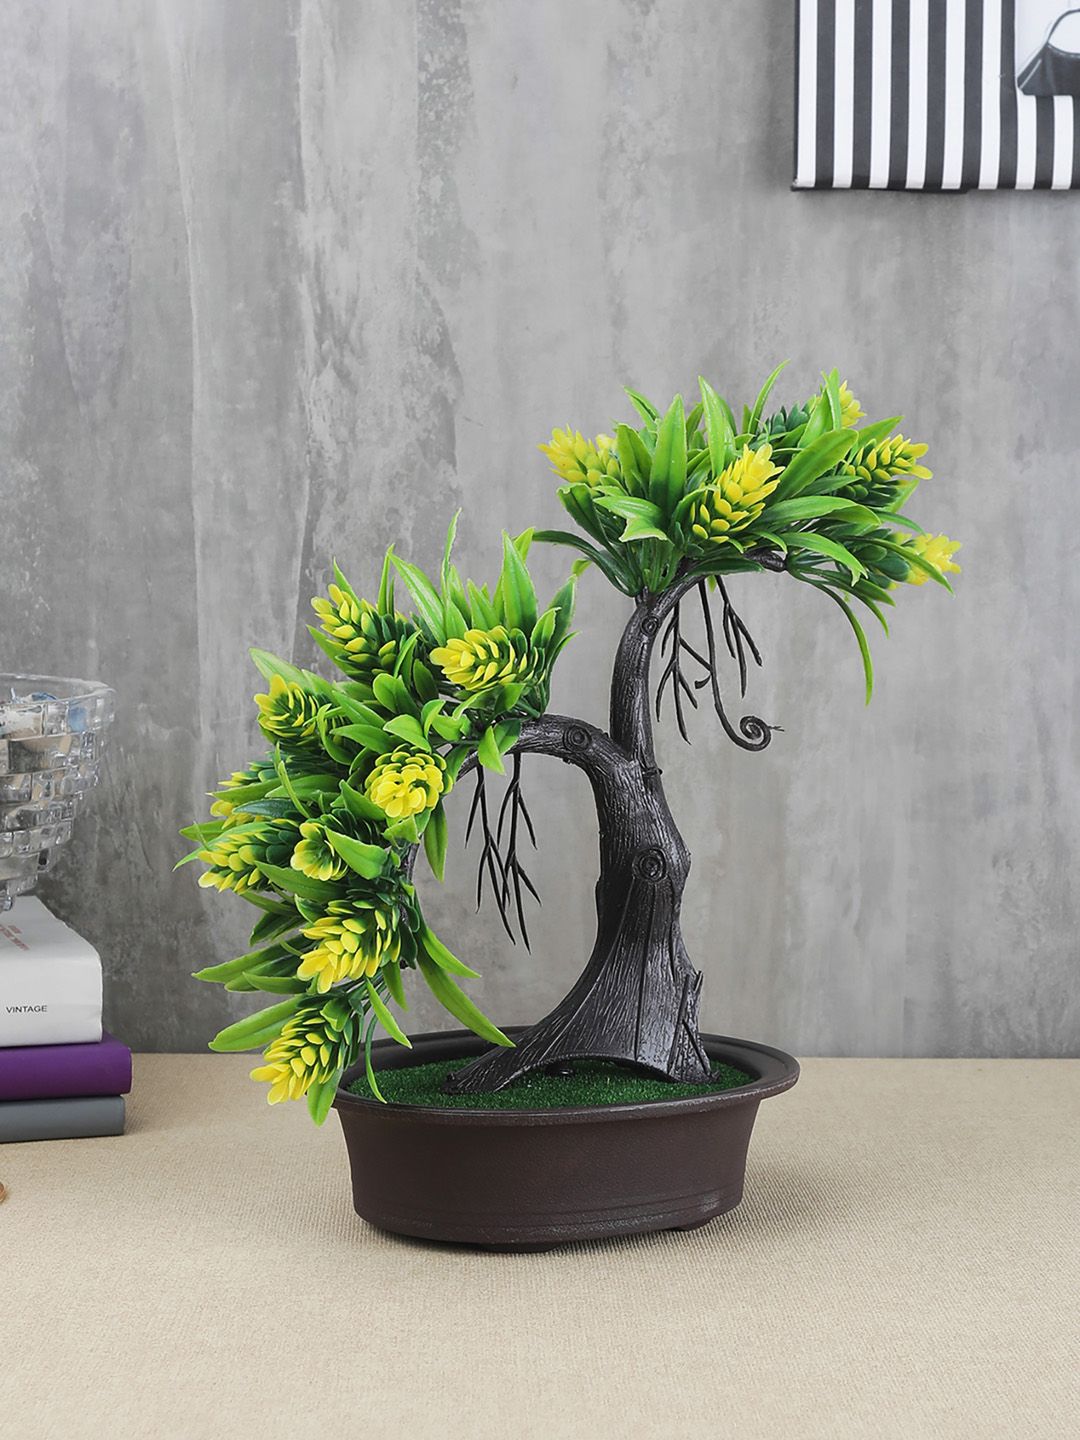 FOLIYAJ Green & Yellow Artificial Shoe Horn Shaped Bonsai Tree With Leaves Buds & Brown Pot Price in India